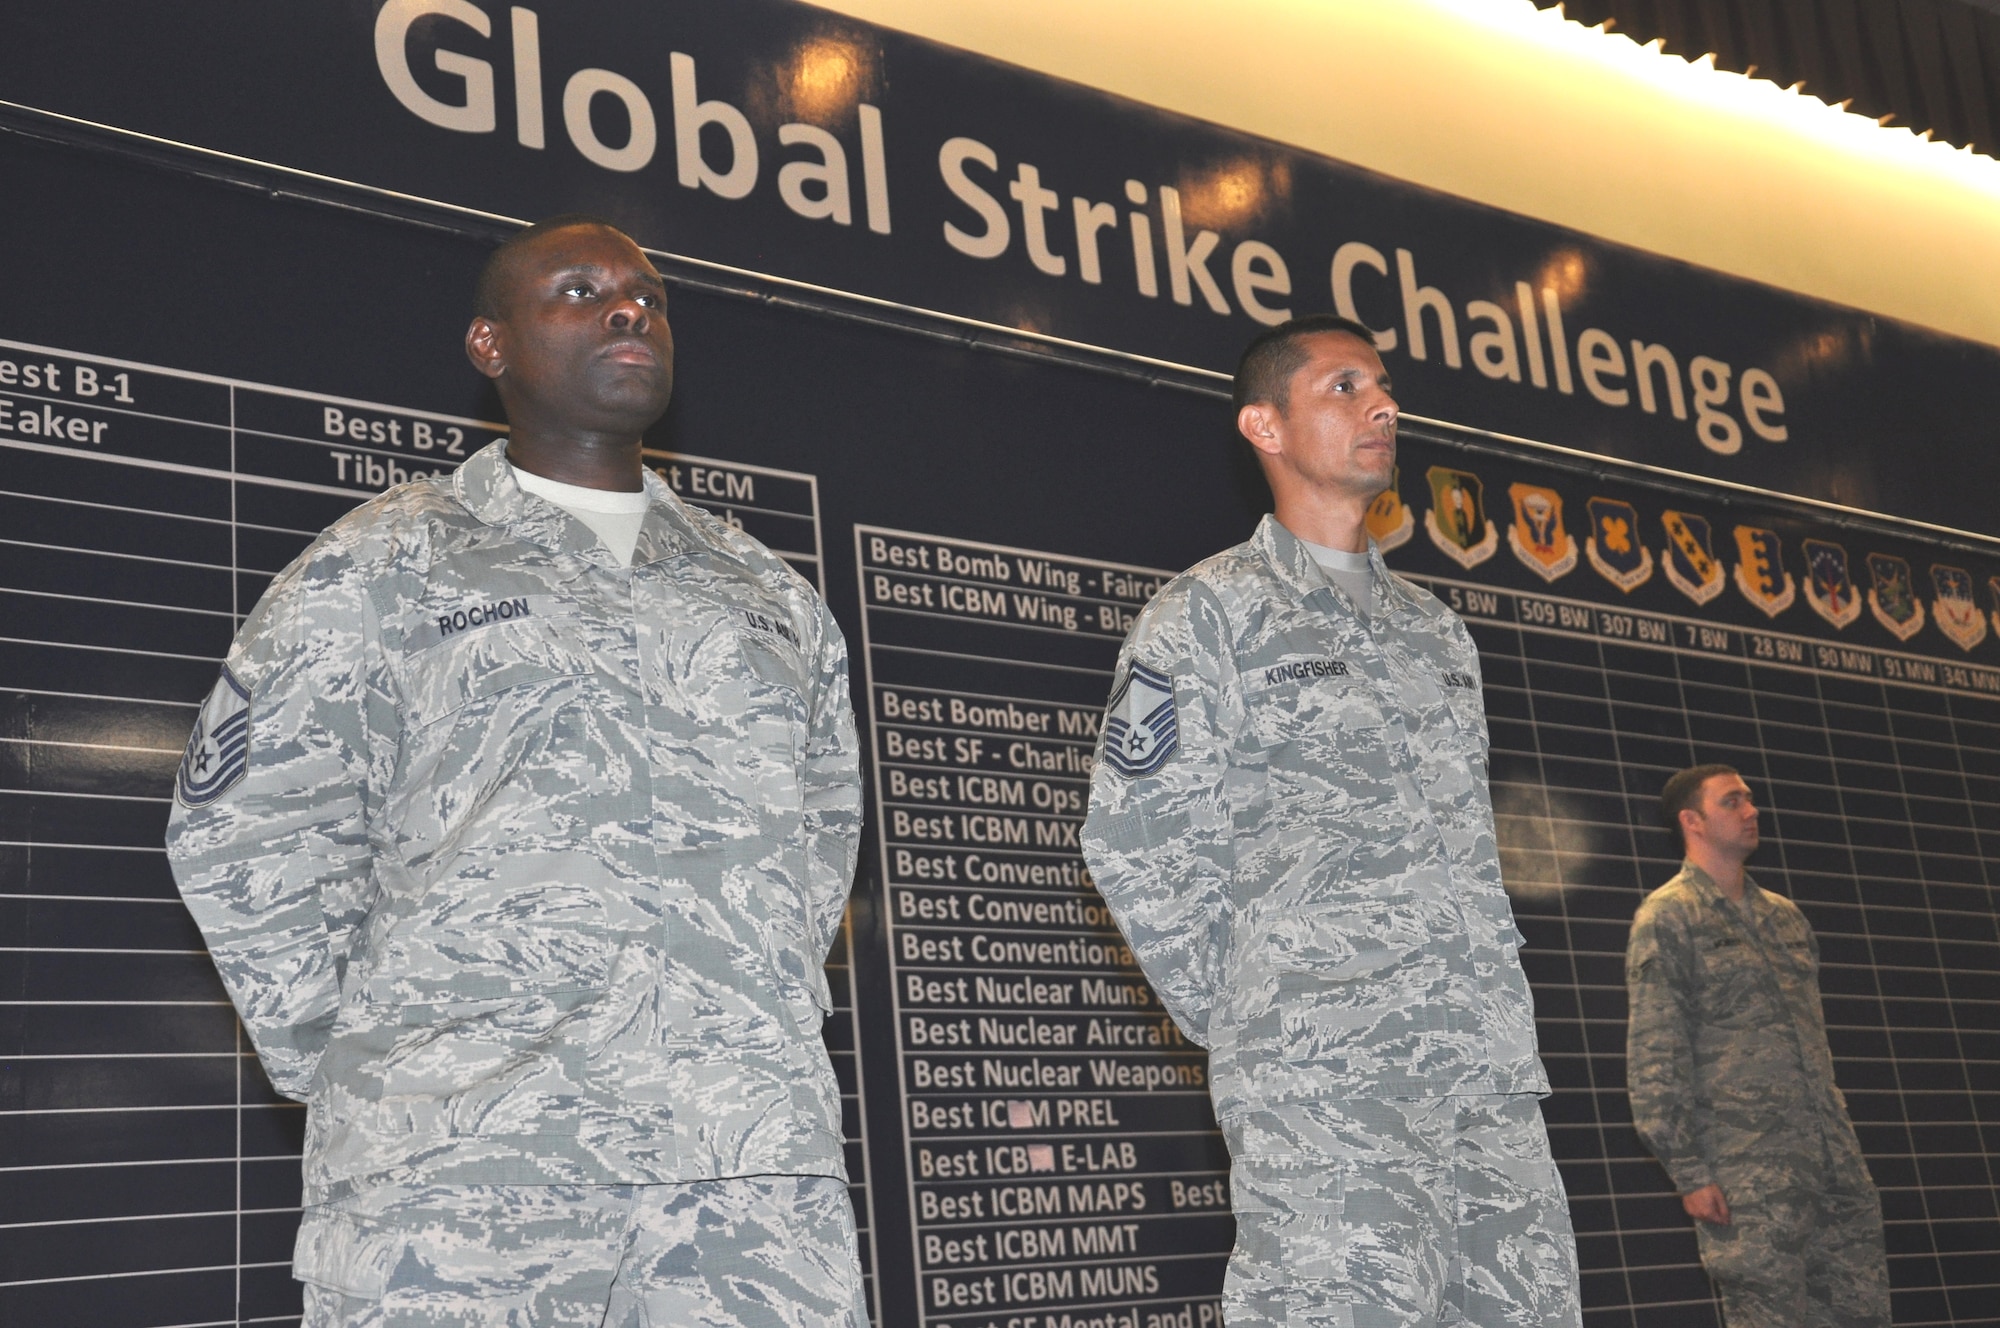 Master Sgt. August F. Rochon Jr., an Air Force Global Strike Command ICBM Facilities Systems Manager, and Senior Master Sgt. Randall Kingfisher, AFGSC Superintendent for ICBM Requirements, practice for the Global Strike Challenge 2014 scoreposting ceremony. (U.S. Air Force photo by Carla Pampe)